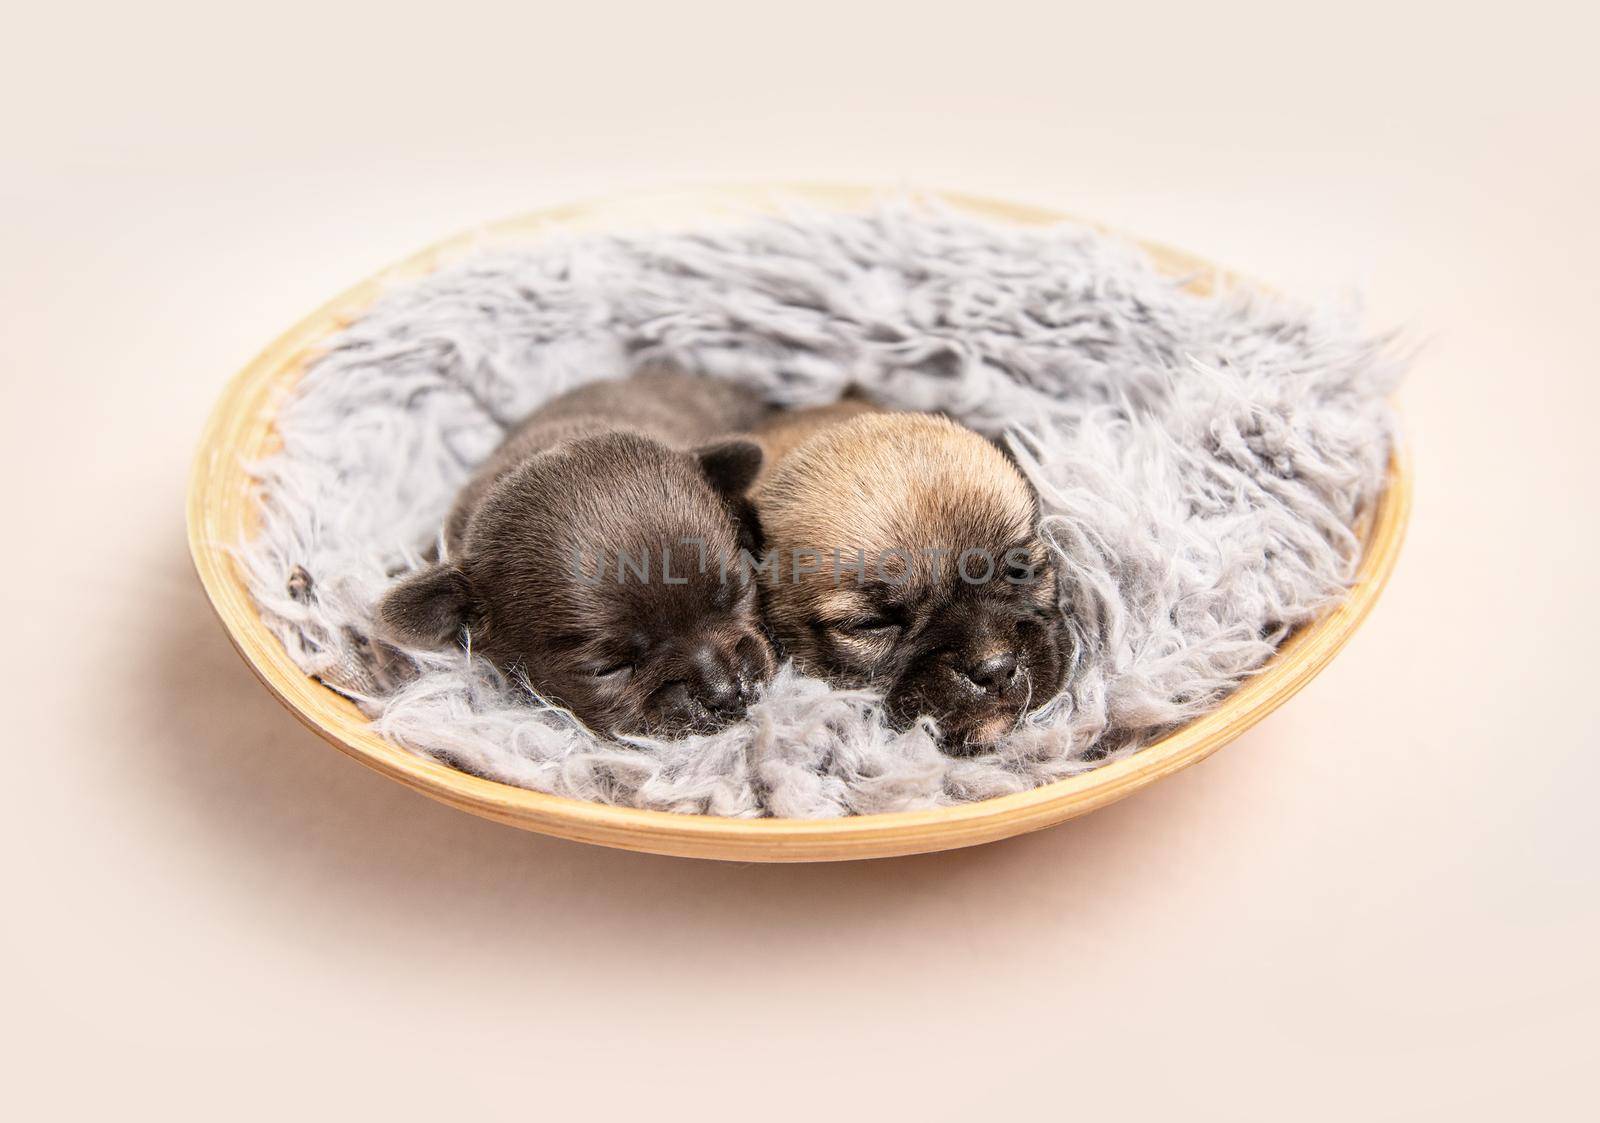 Little chihuahua breed puppies on coverlet by tan4ikk1